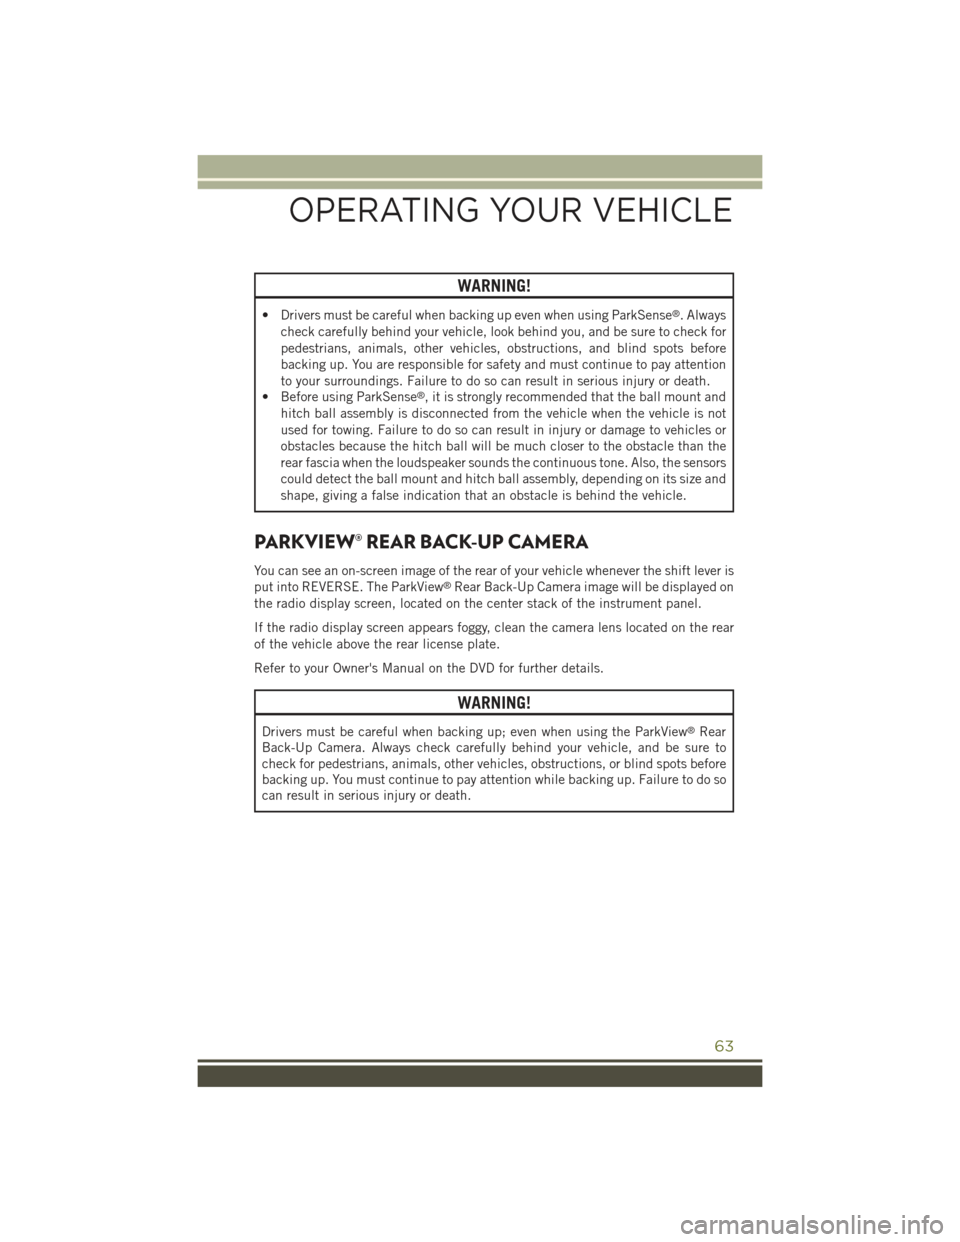 JEEP CHEROKEE 2015 KL / 5.G User Guide WARNING!
• Drivers must be careful when backing up even when using ParkSense®. Always
check carefully behind your vehicle, look behind you, and be sure to check for
pedestrians, animals, other vehi